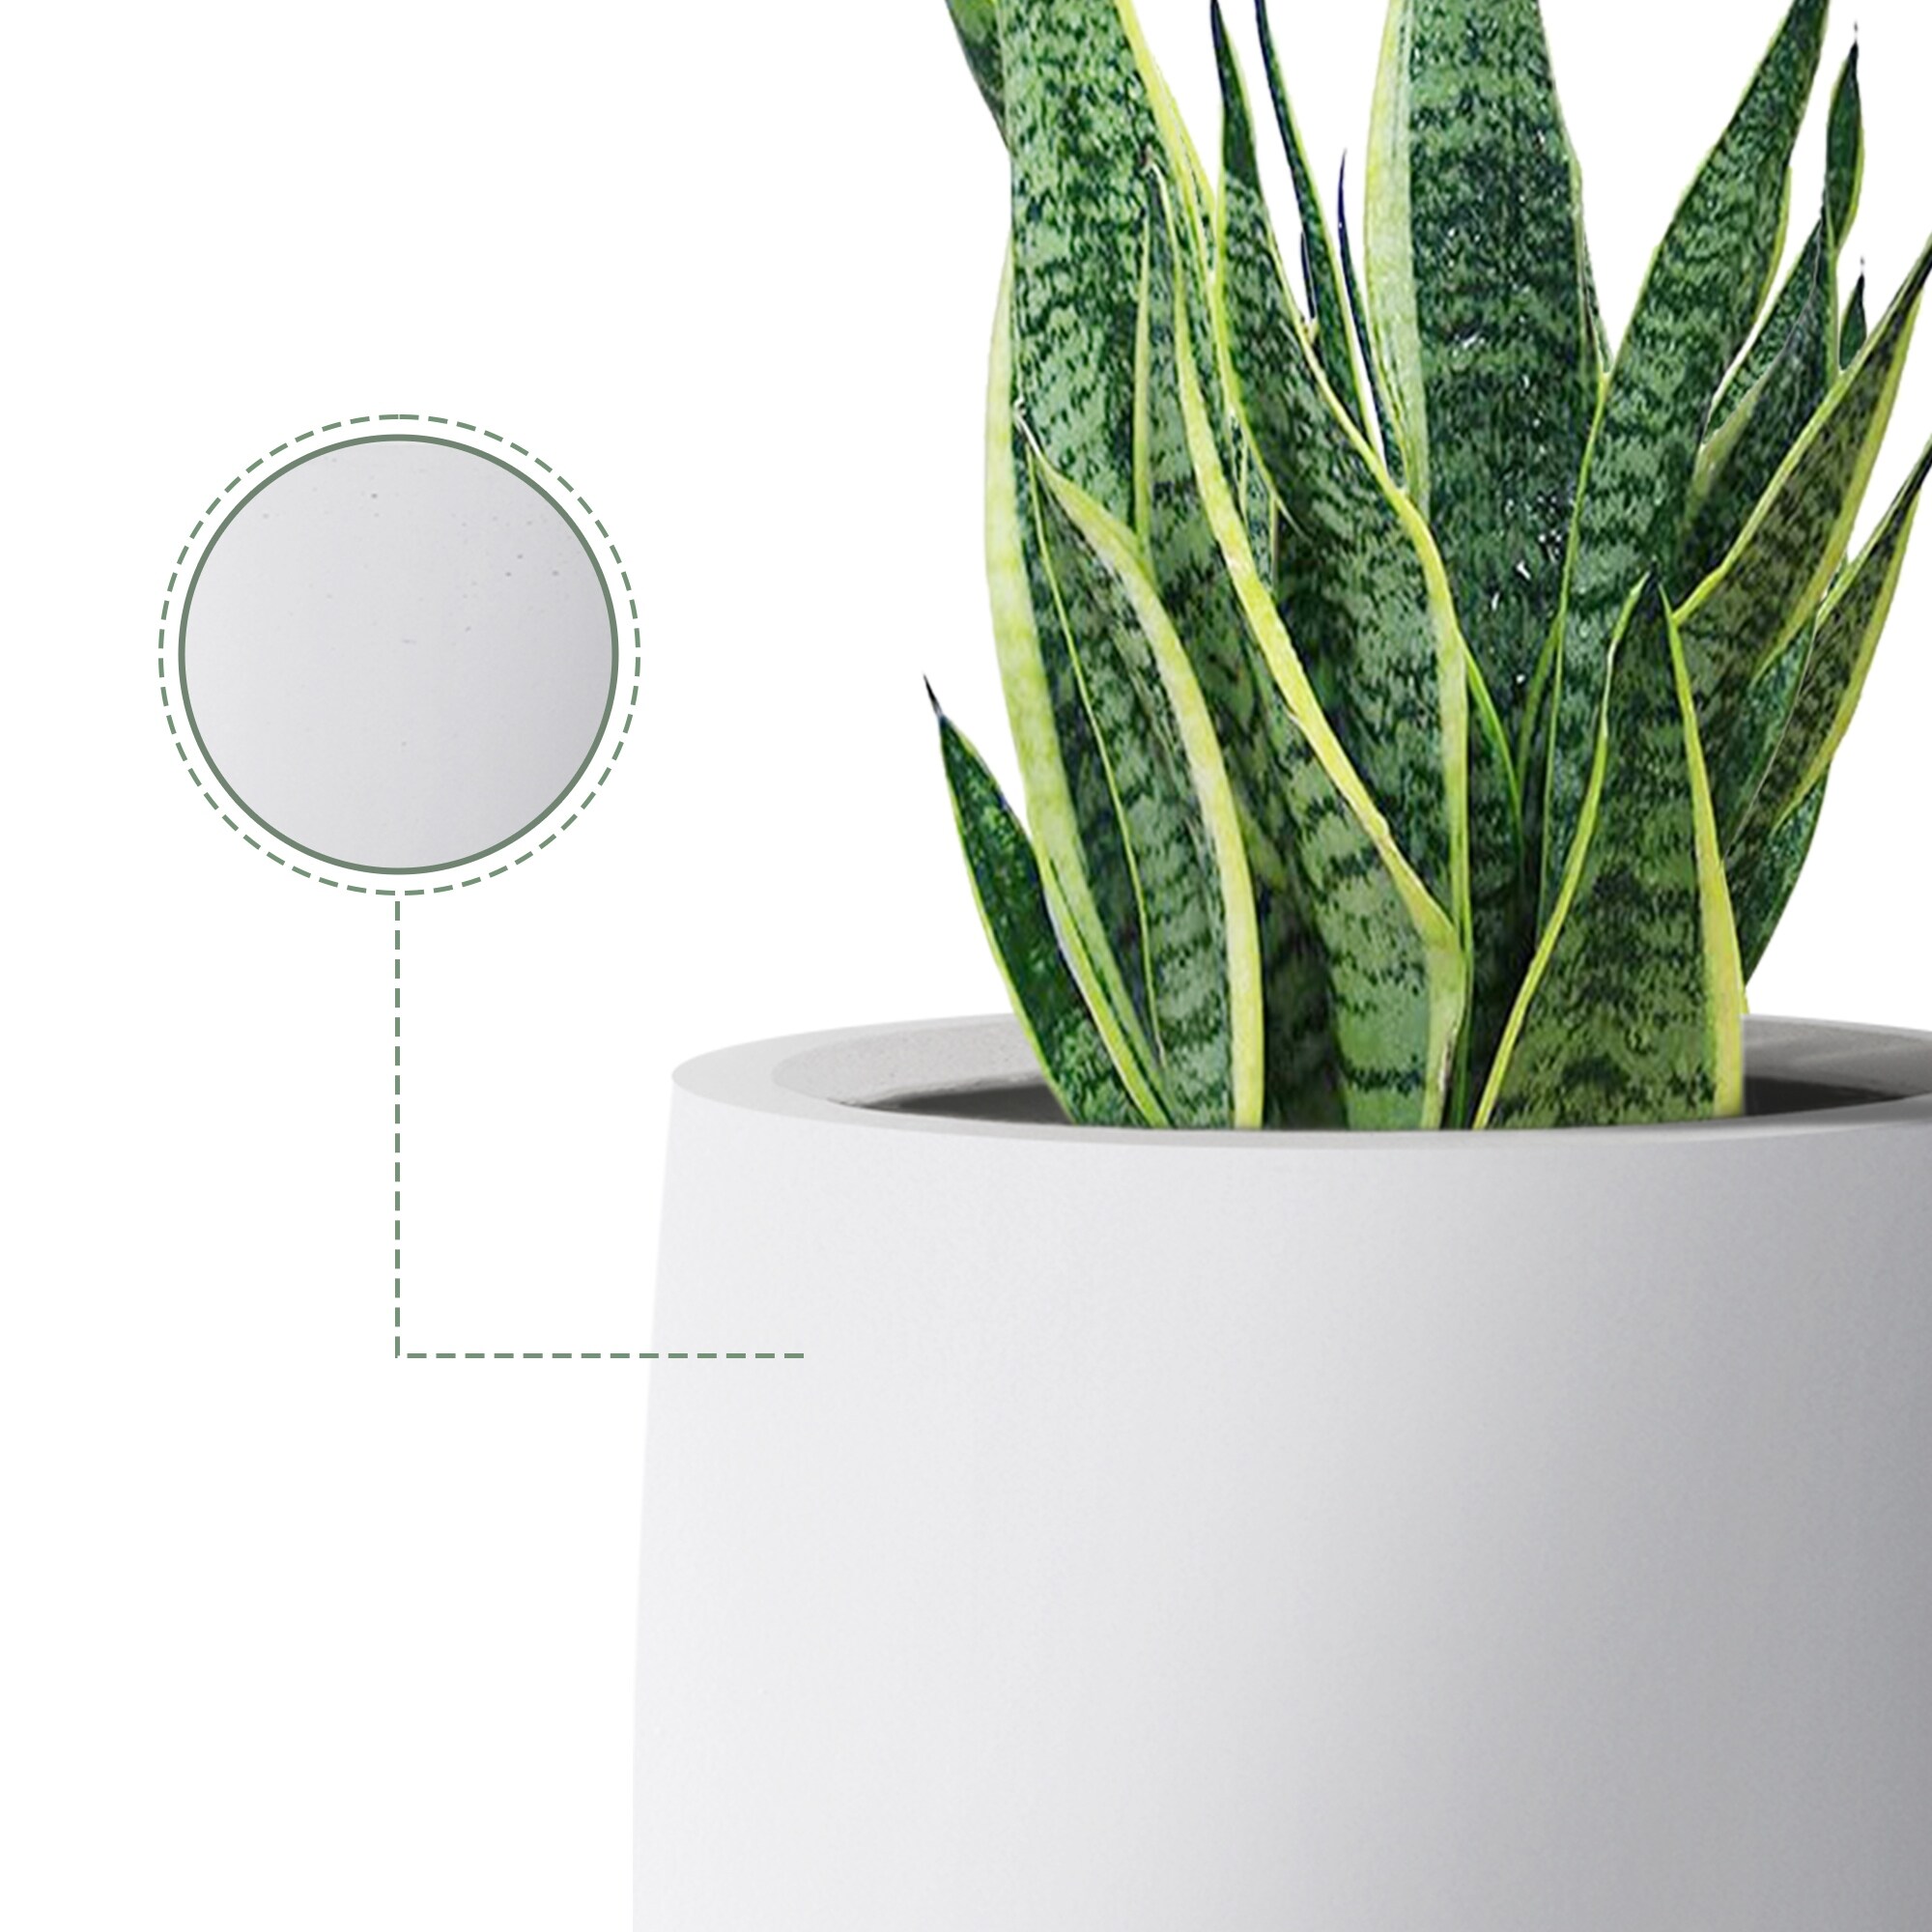 PLANTARA 24 H Concrete Tall Solid White Planter, Large Outdoor Plant Pot, Modern Tapered Flower Pot for Garden